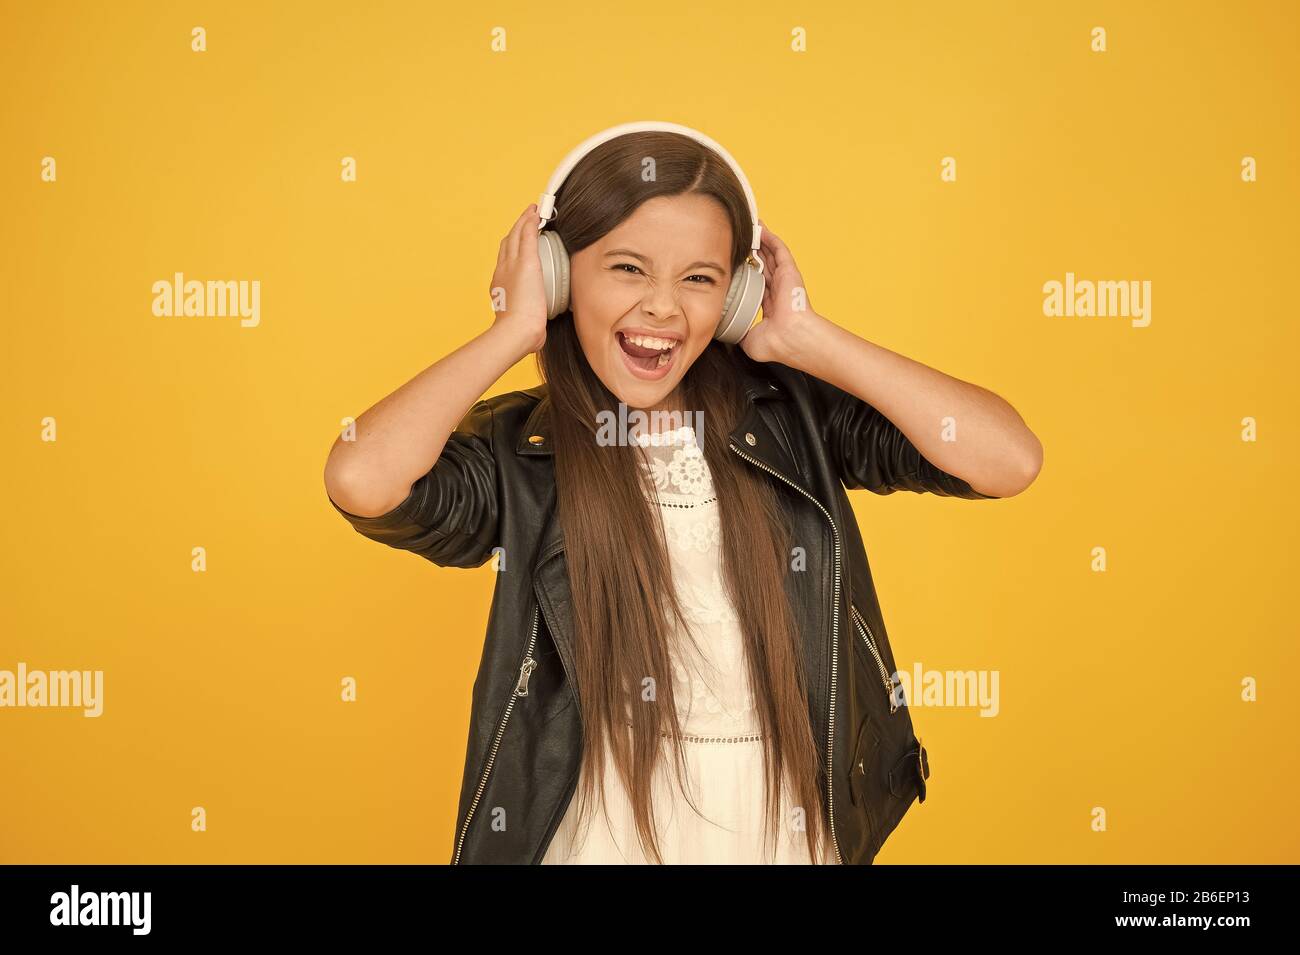 Page 3 - Dj Lady High Resolution Stock Photography and Images - Alamy